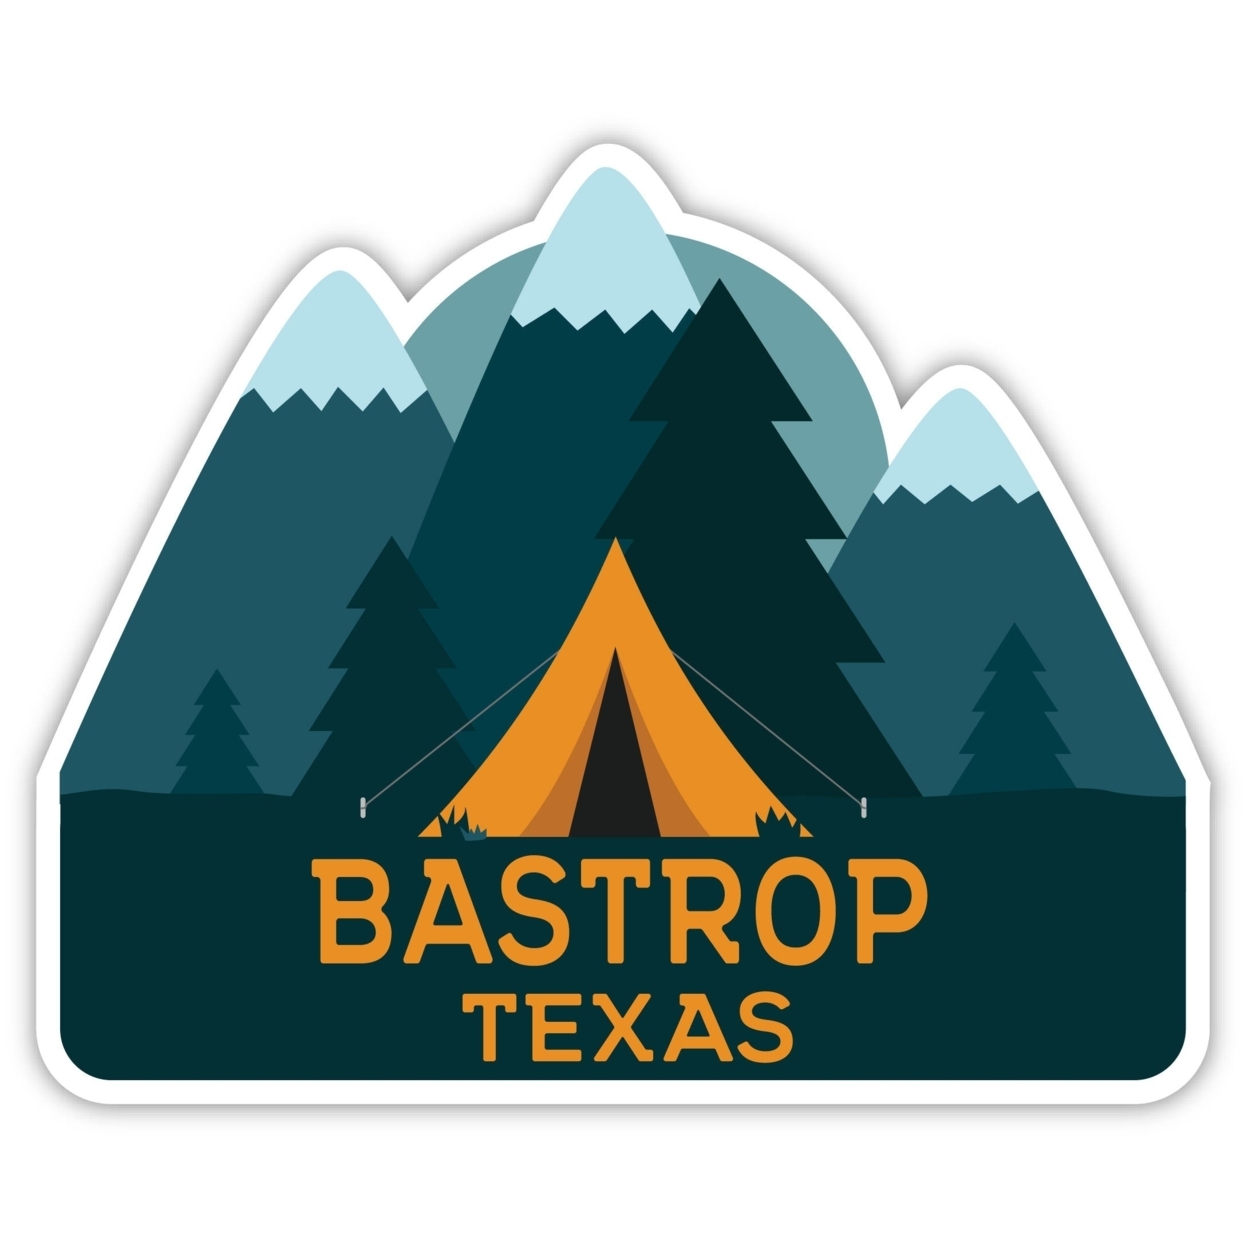 Bastrop Texas Souvenir Decorative Stickers (Choose Theme And Size) - 4-Pack, 10-Inch, Camp Life